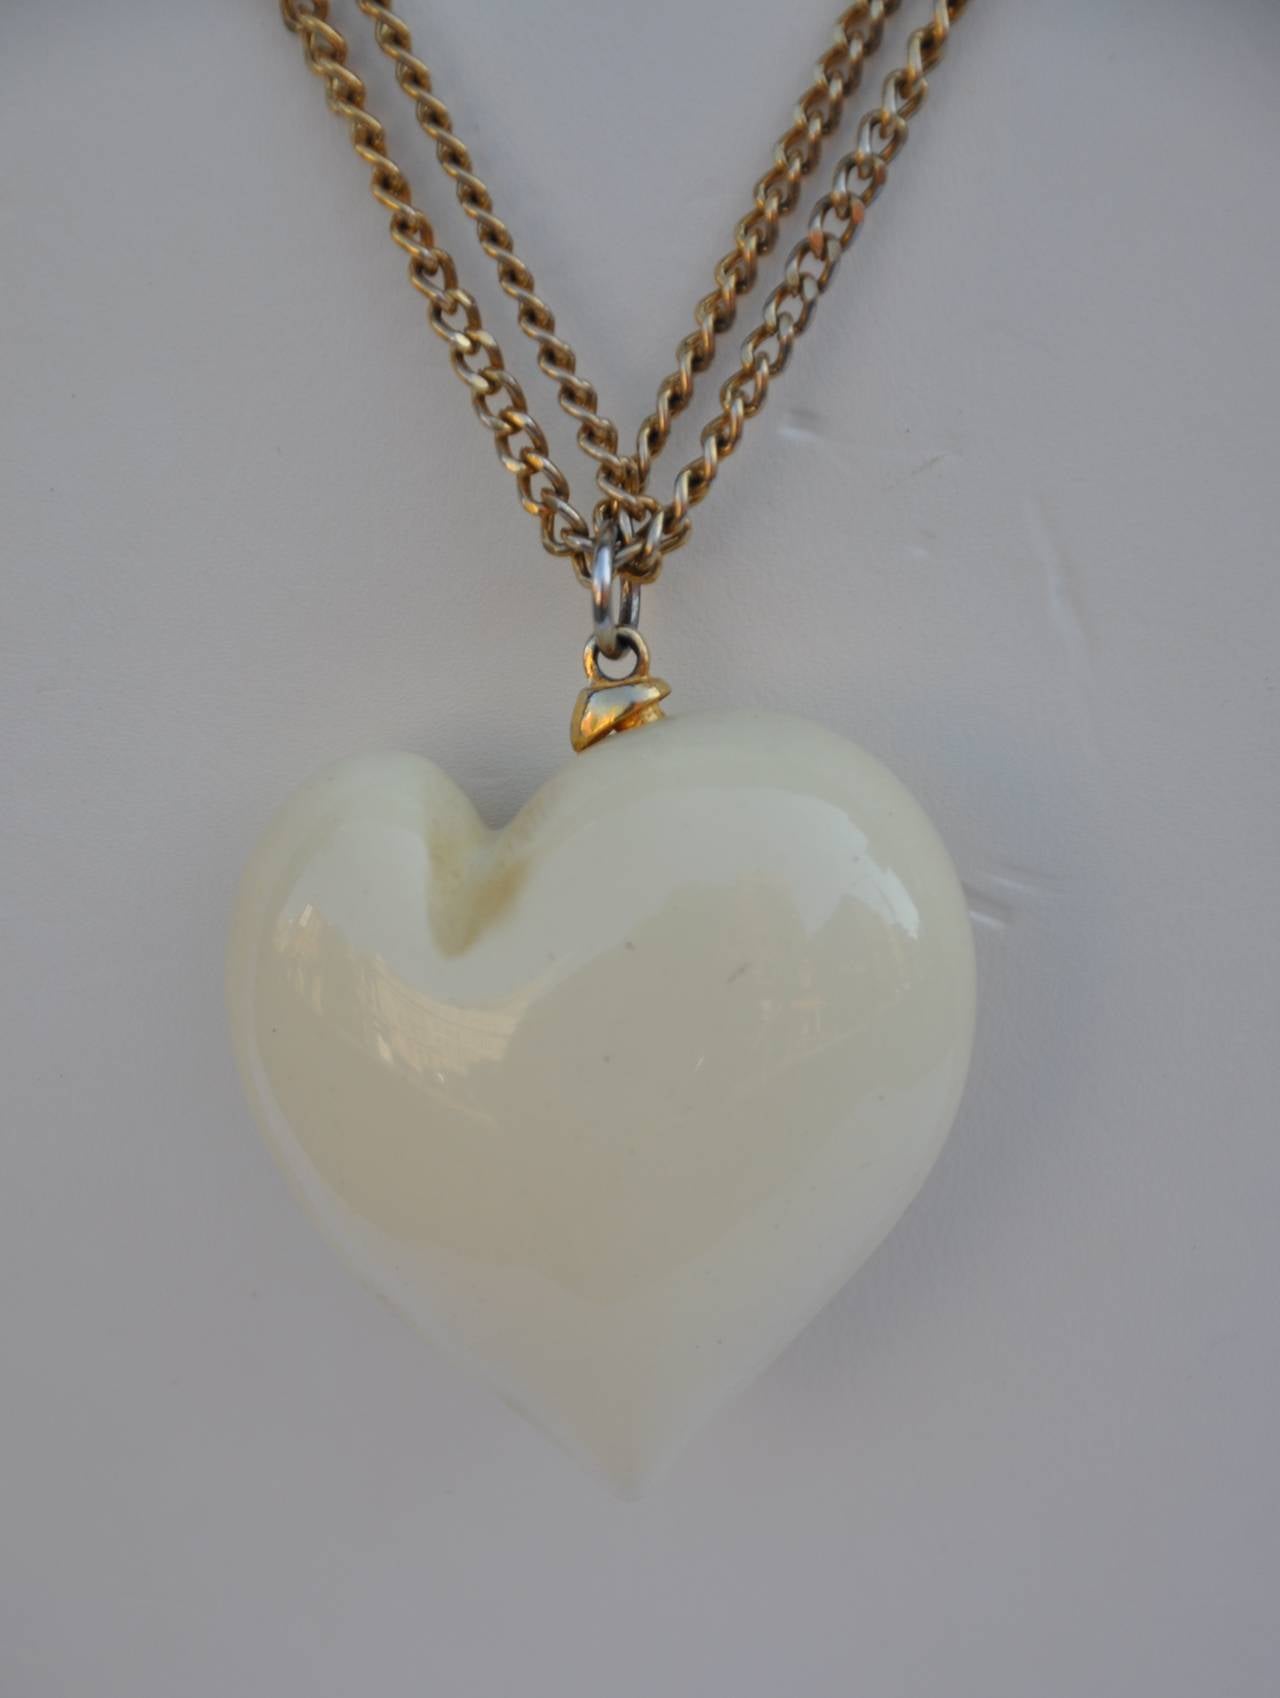        Kenneth Jay Lane, who recently left us, created this wonderful elegant huge cream lucite heart is signed accented with a gold tone link necklace. The heart measures 1 6/8" in width, 1 6/8" in length and 7/8" in depth. The